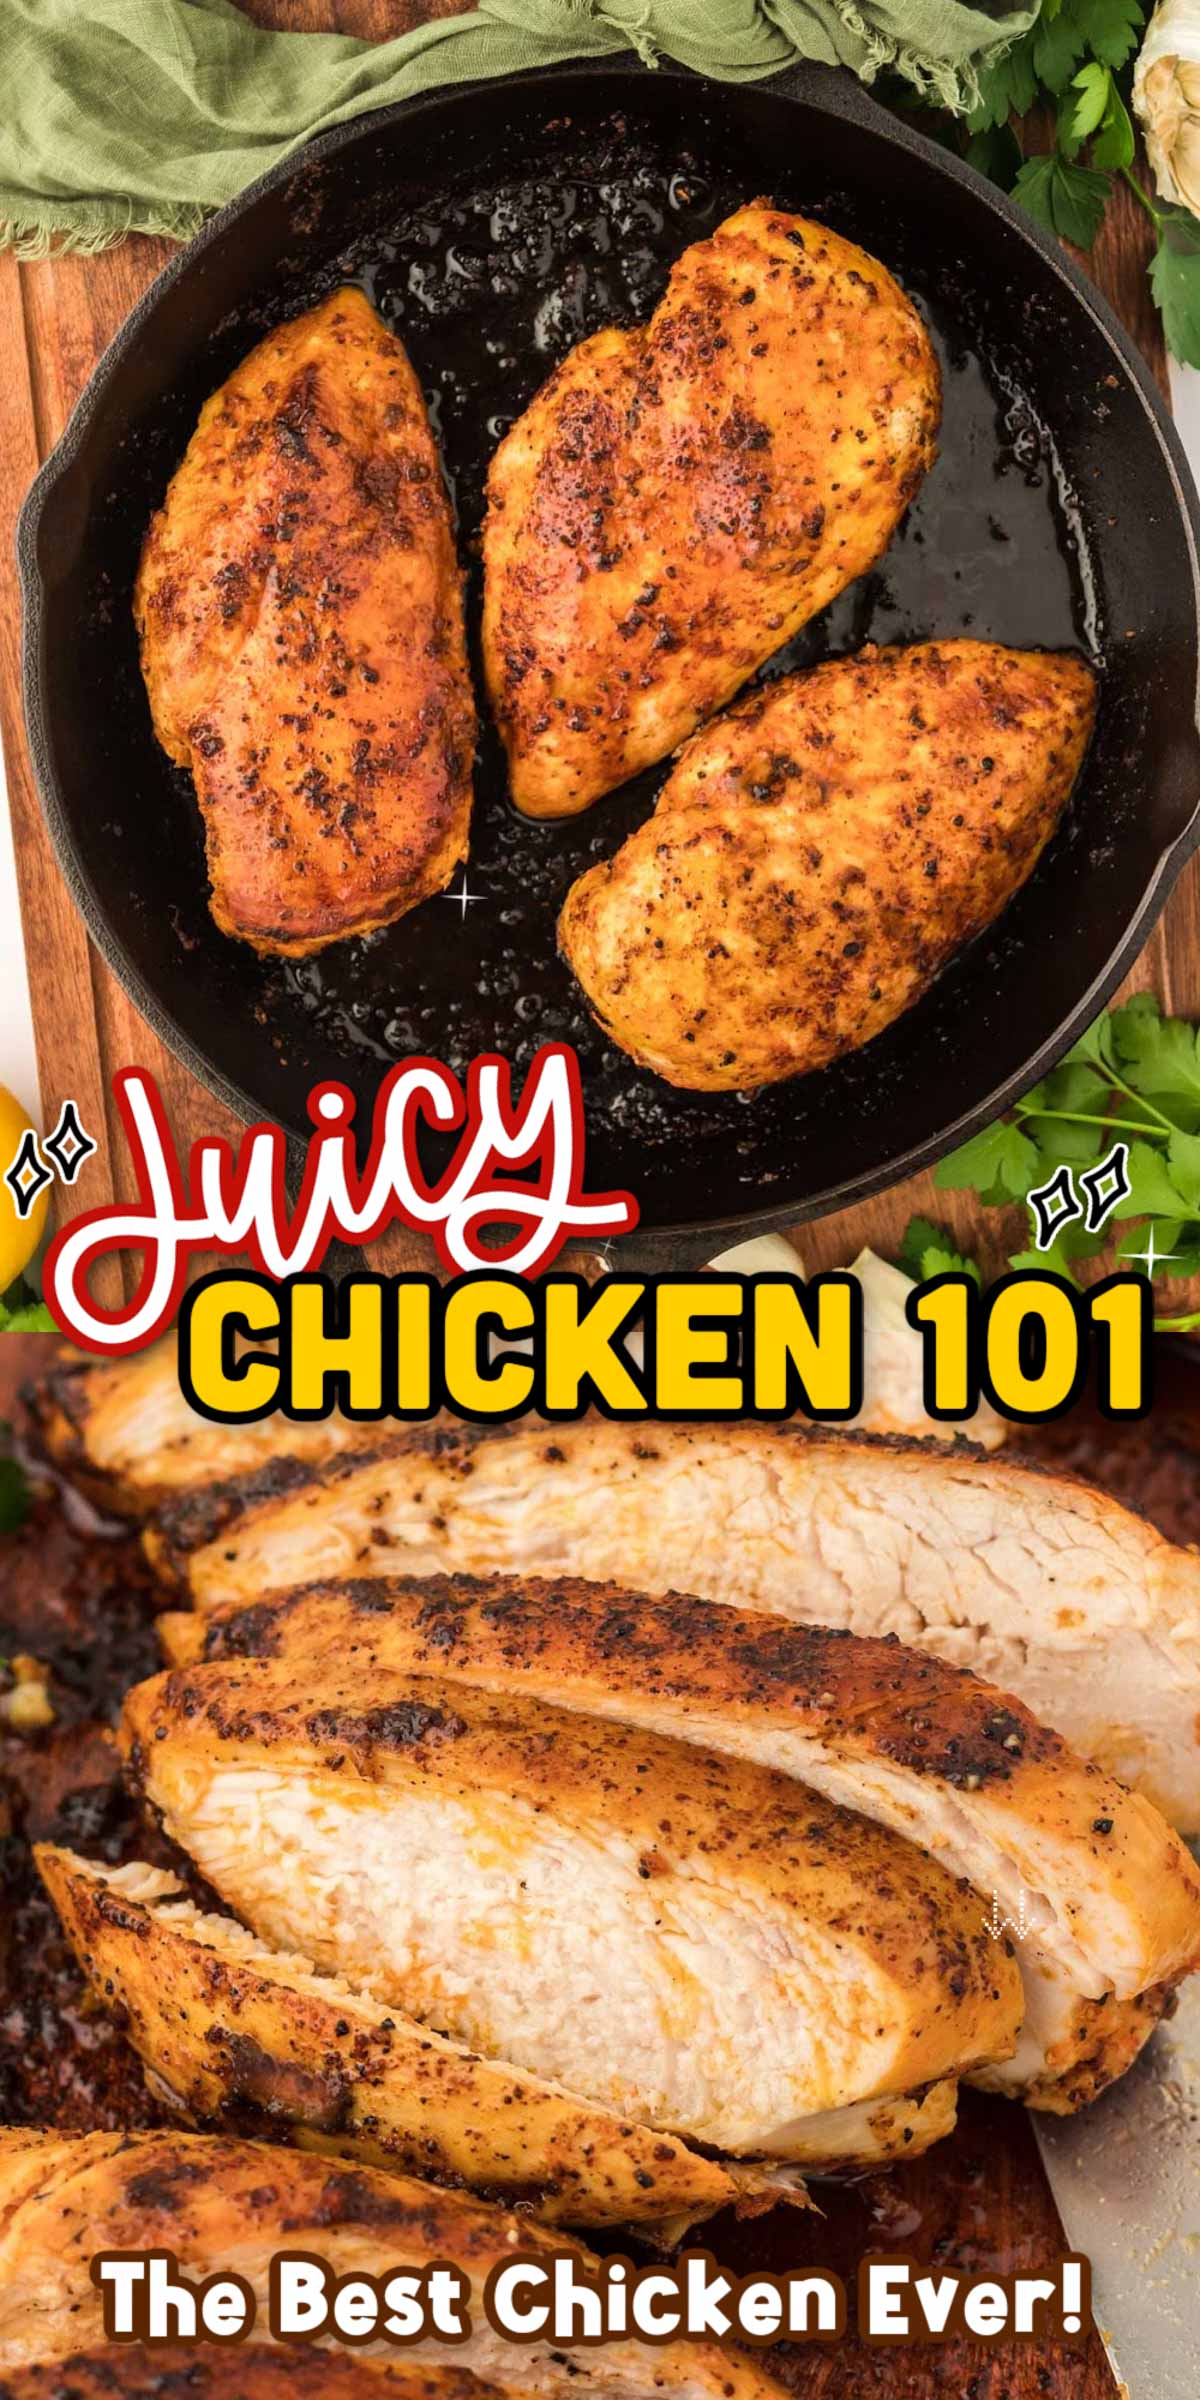 Juicy Chicken 101 is a seasoned, easy-to-make recipe that boasts BIG flavor and serves up perfectly cooked chicken breasts every time; great for dinner, meal prep, or salads! Takes less than 30 minutes to make! via @sugarandsoulco